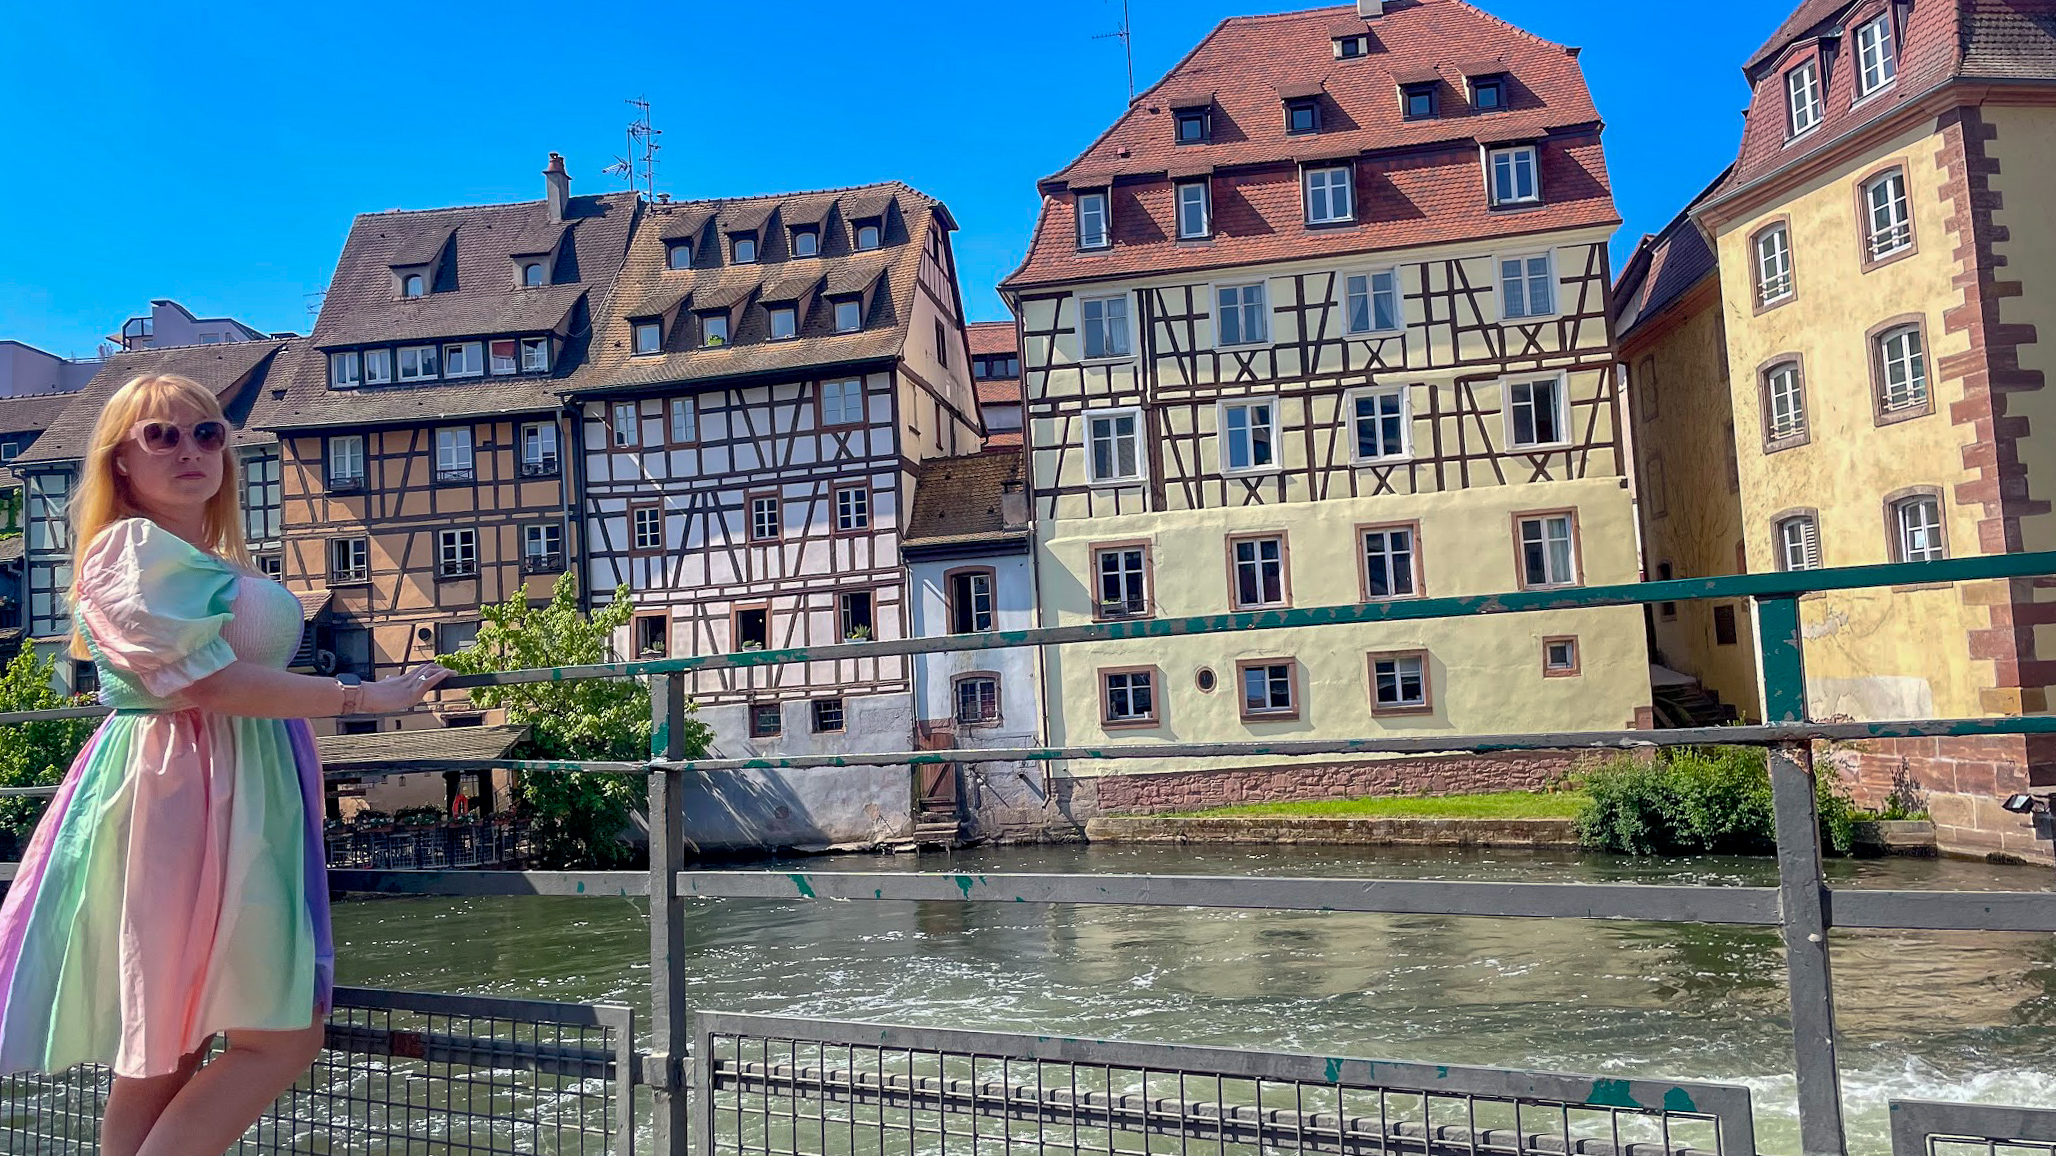 Amazing Alsace - 2 Days in Strasbourg with the Strasbourg Pass